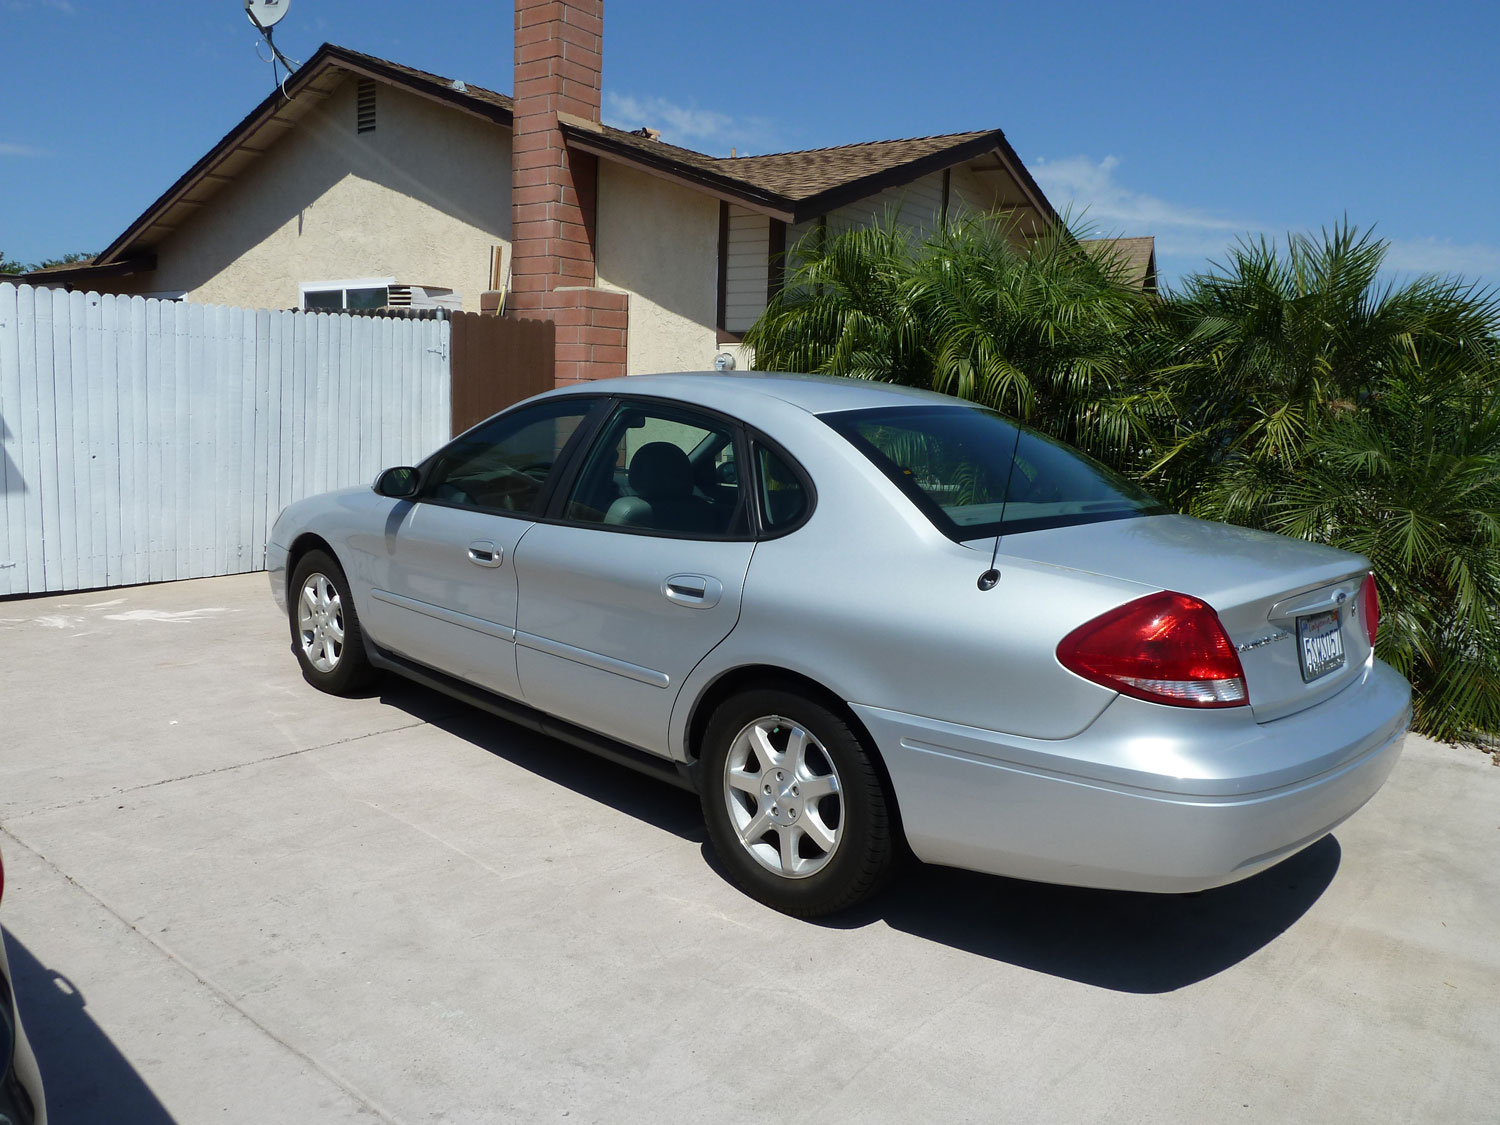 2006 Ford taurus consumer review